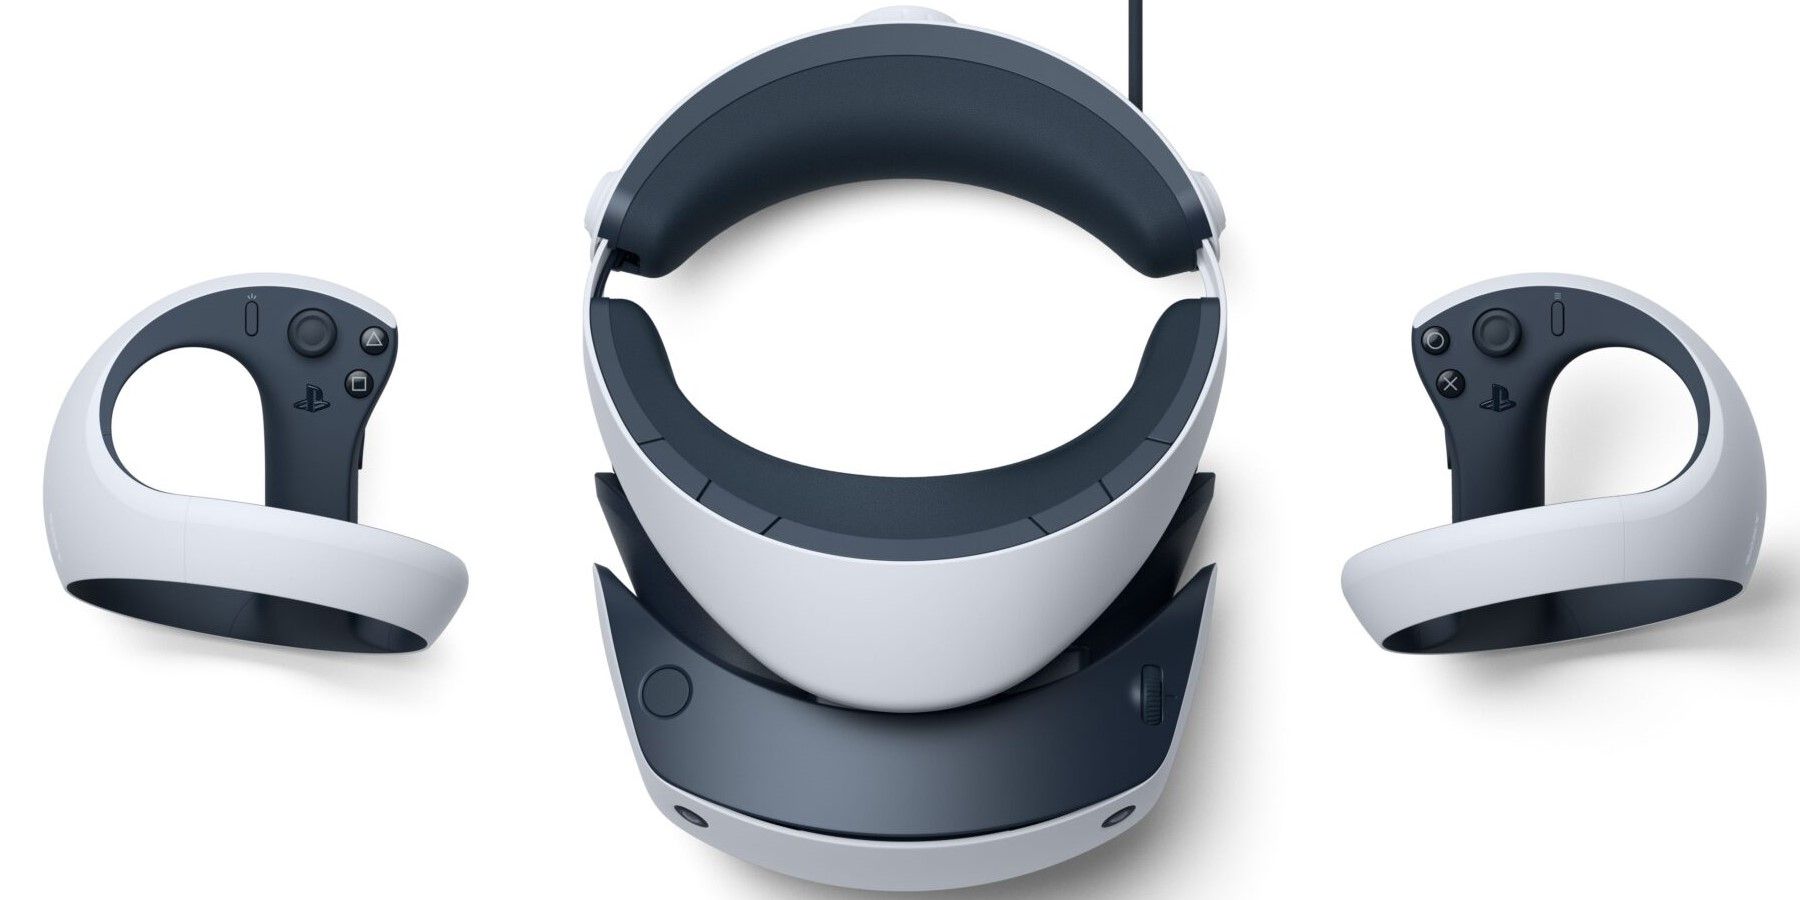 ps-vr2-headset-and-controllers